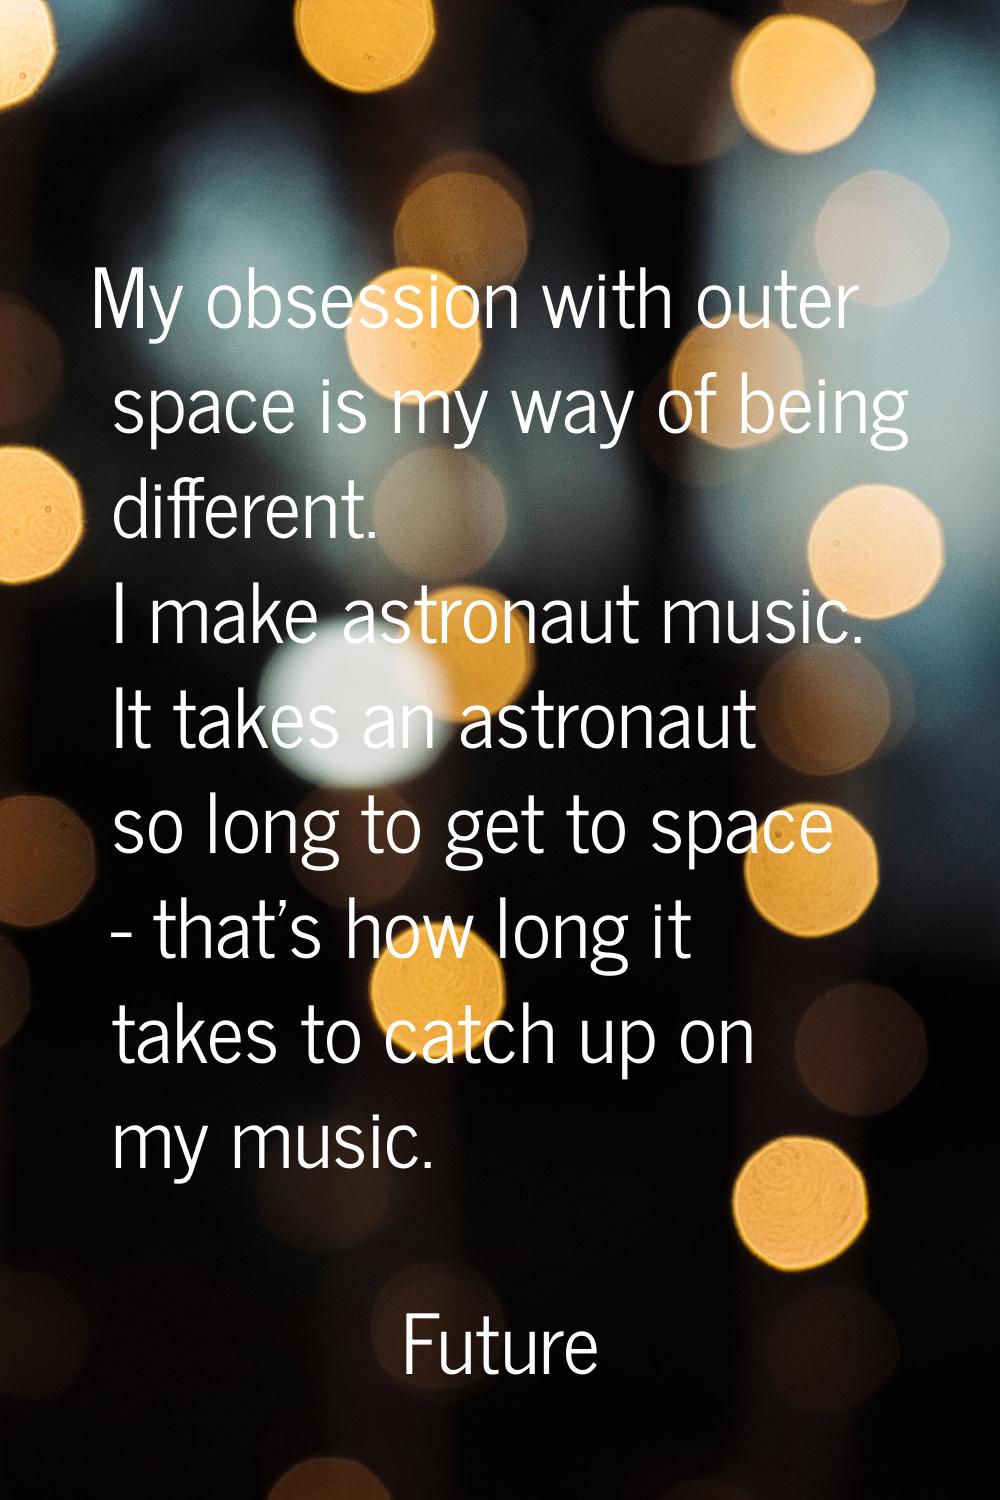 My obsession with outer space is my way of being different. I make astronaut music. It takes an ast